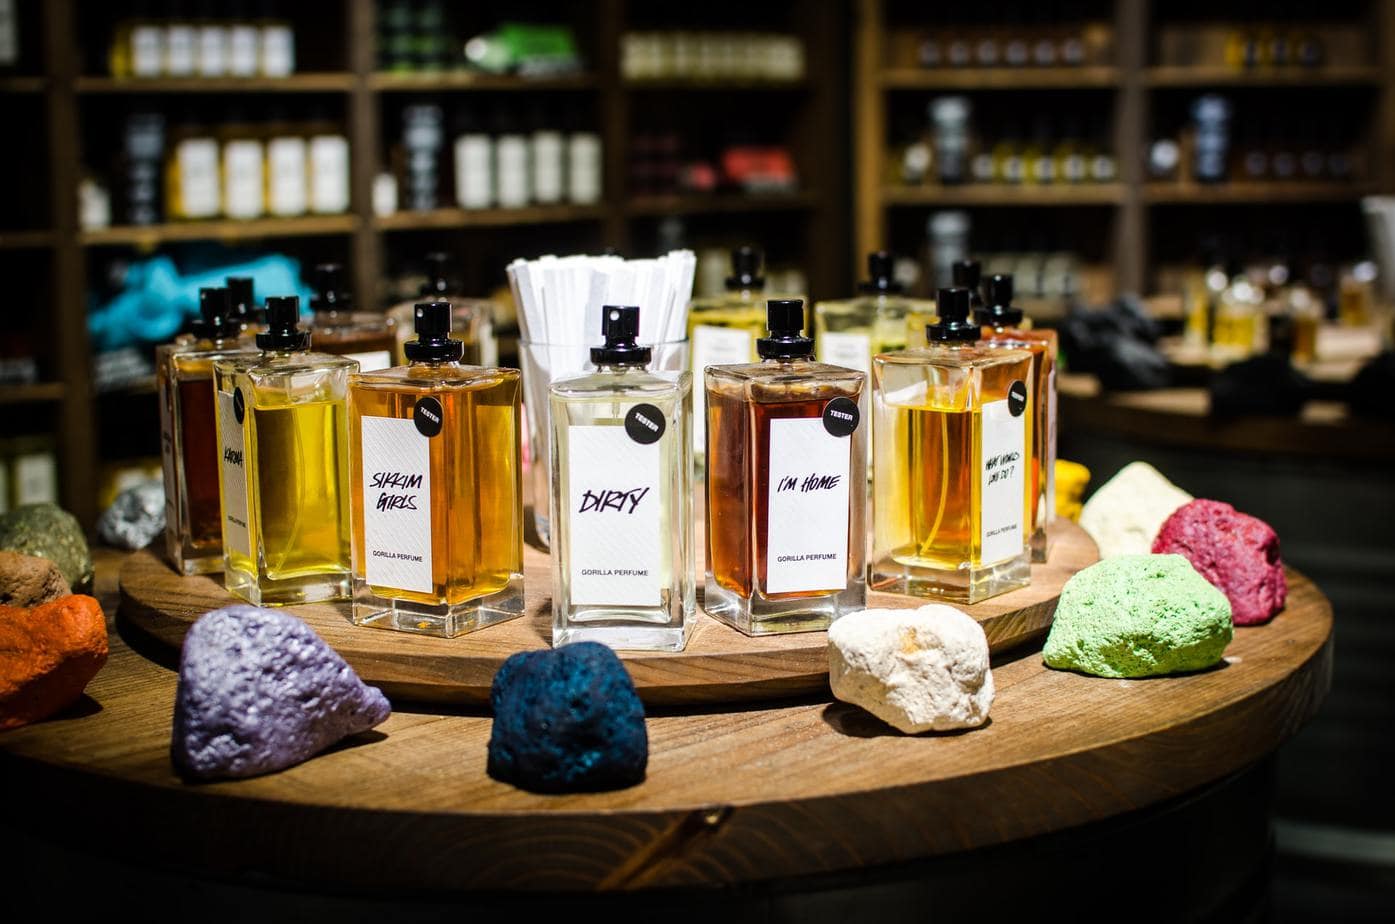 Meet the perfumes that match your zodiac signs!